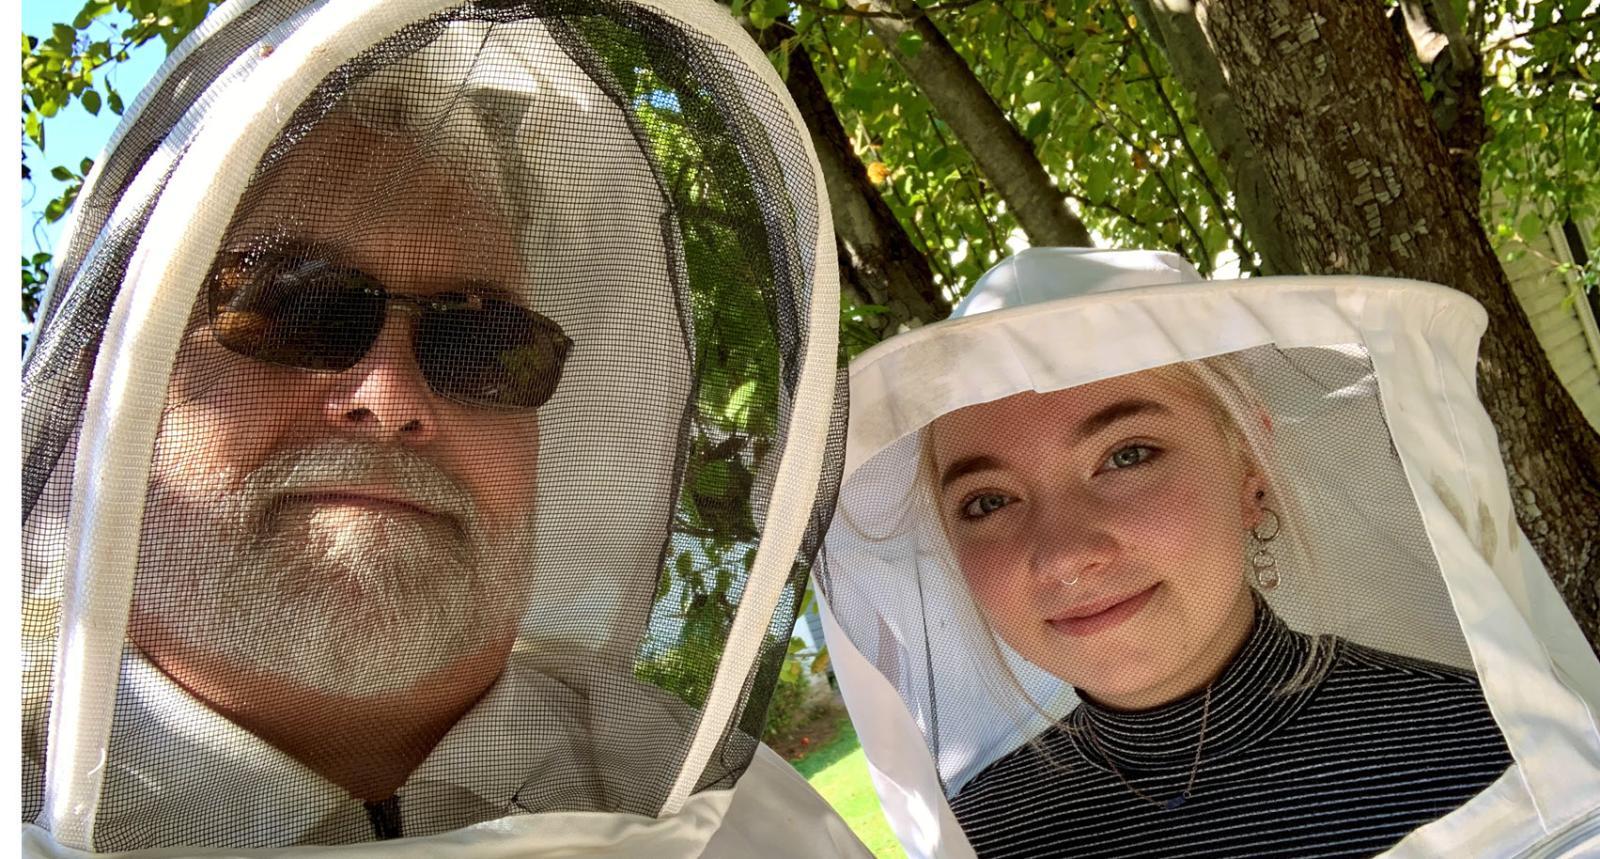 Baxter employee and his daughter wearing beekeepers' outfits